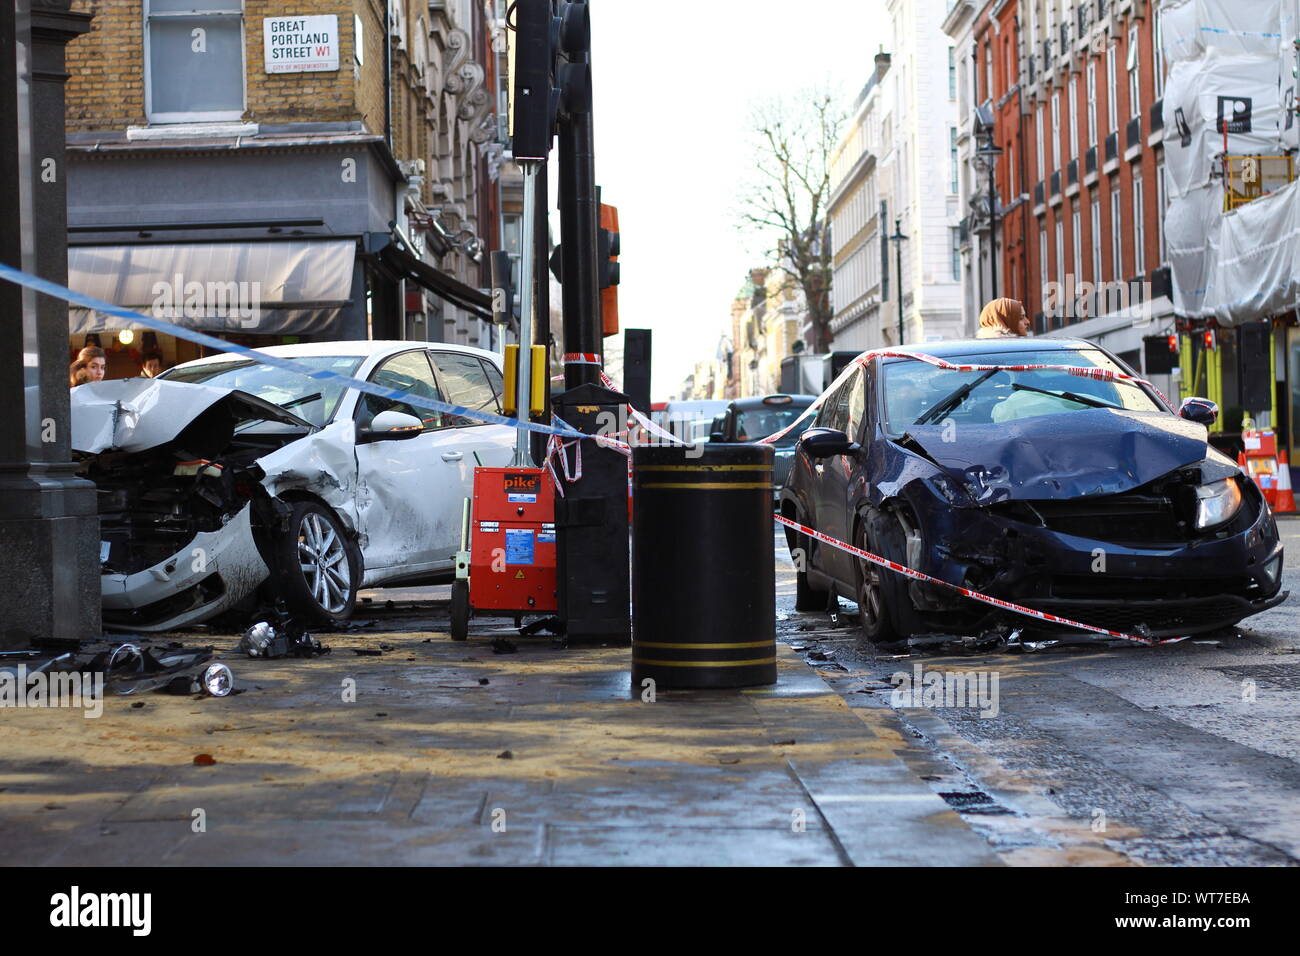 AUTHENTIC IMAGERY. CAR CRASH IN LONDON'S WEST END. BAD DRIVING. REAL THINGS. REAL PLACES. REAL PEOPLE. HONEST IMAGERY. HEARTFELT IMAGERY. NEWS TYPE IMAGERY. AFTERMATH IMAGERY. CONSEQUENCES OR AFTER EFFECTS OF A SIGNIFICANT UNPLEASANT EVENT. ACCIDENT. ACCIDENTAL EVENTS. ROAD SAFETY. AUTHENTIC IMAGERY ON alamy.com Stock Photo